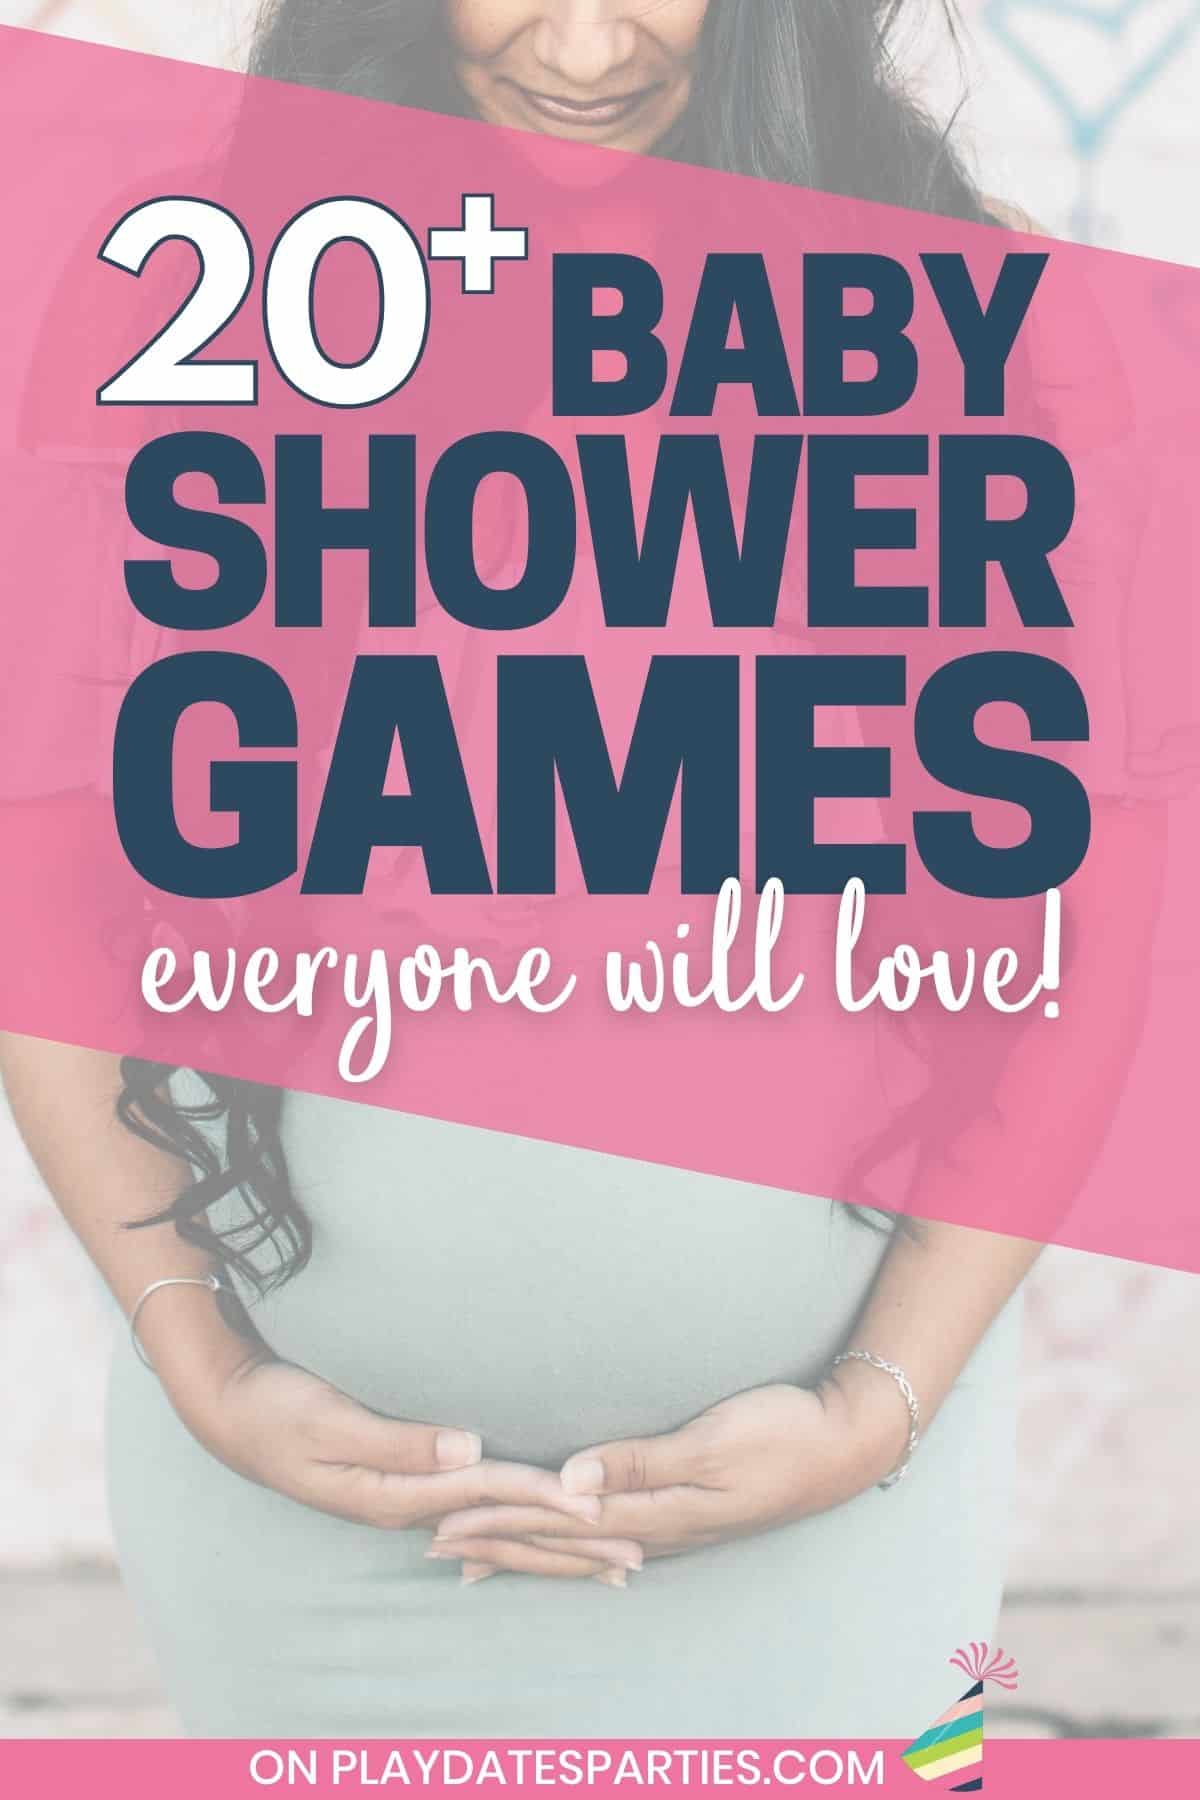 A pregnant woman smiling at her belly with text overlay 20 plus baby shower games everyone will love.